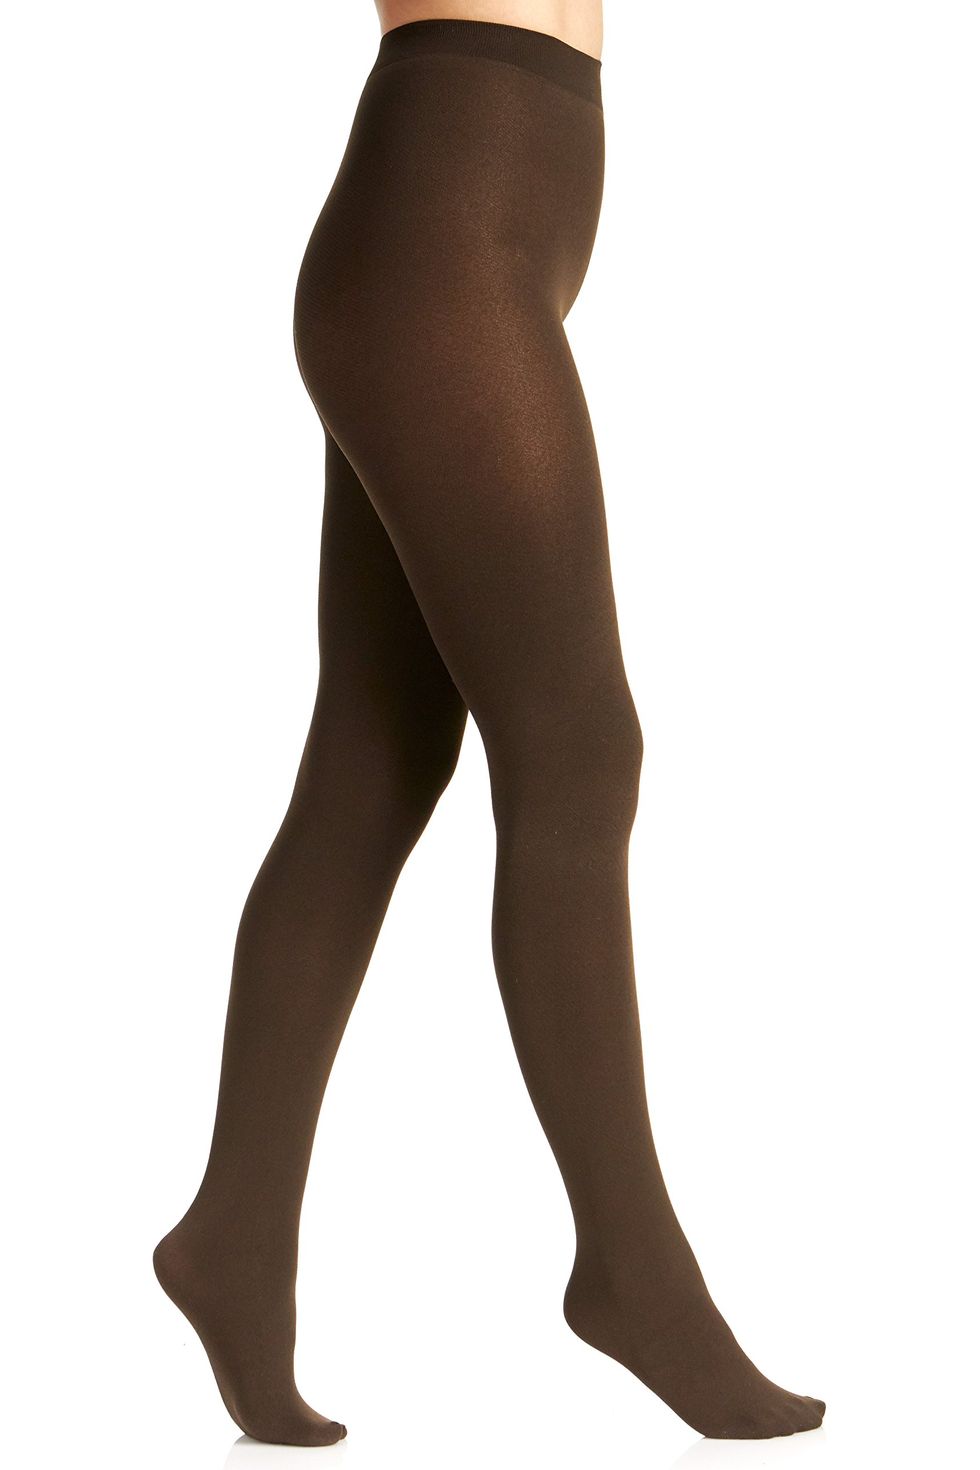 Cozytightz – Fleece Lined Translucent Tights, Leggings That Look like  Tights, Comfy Tights Warm Winter Leggings